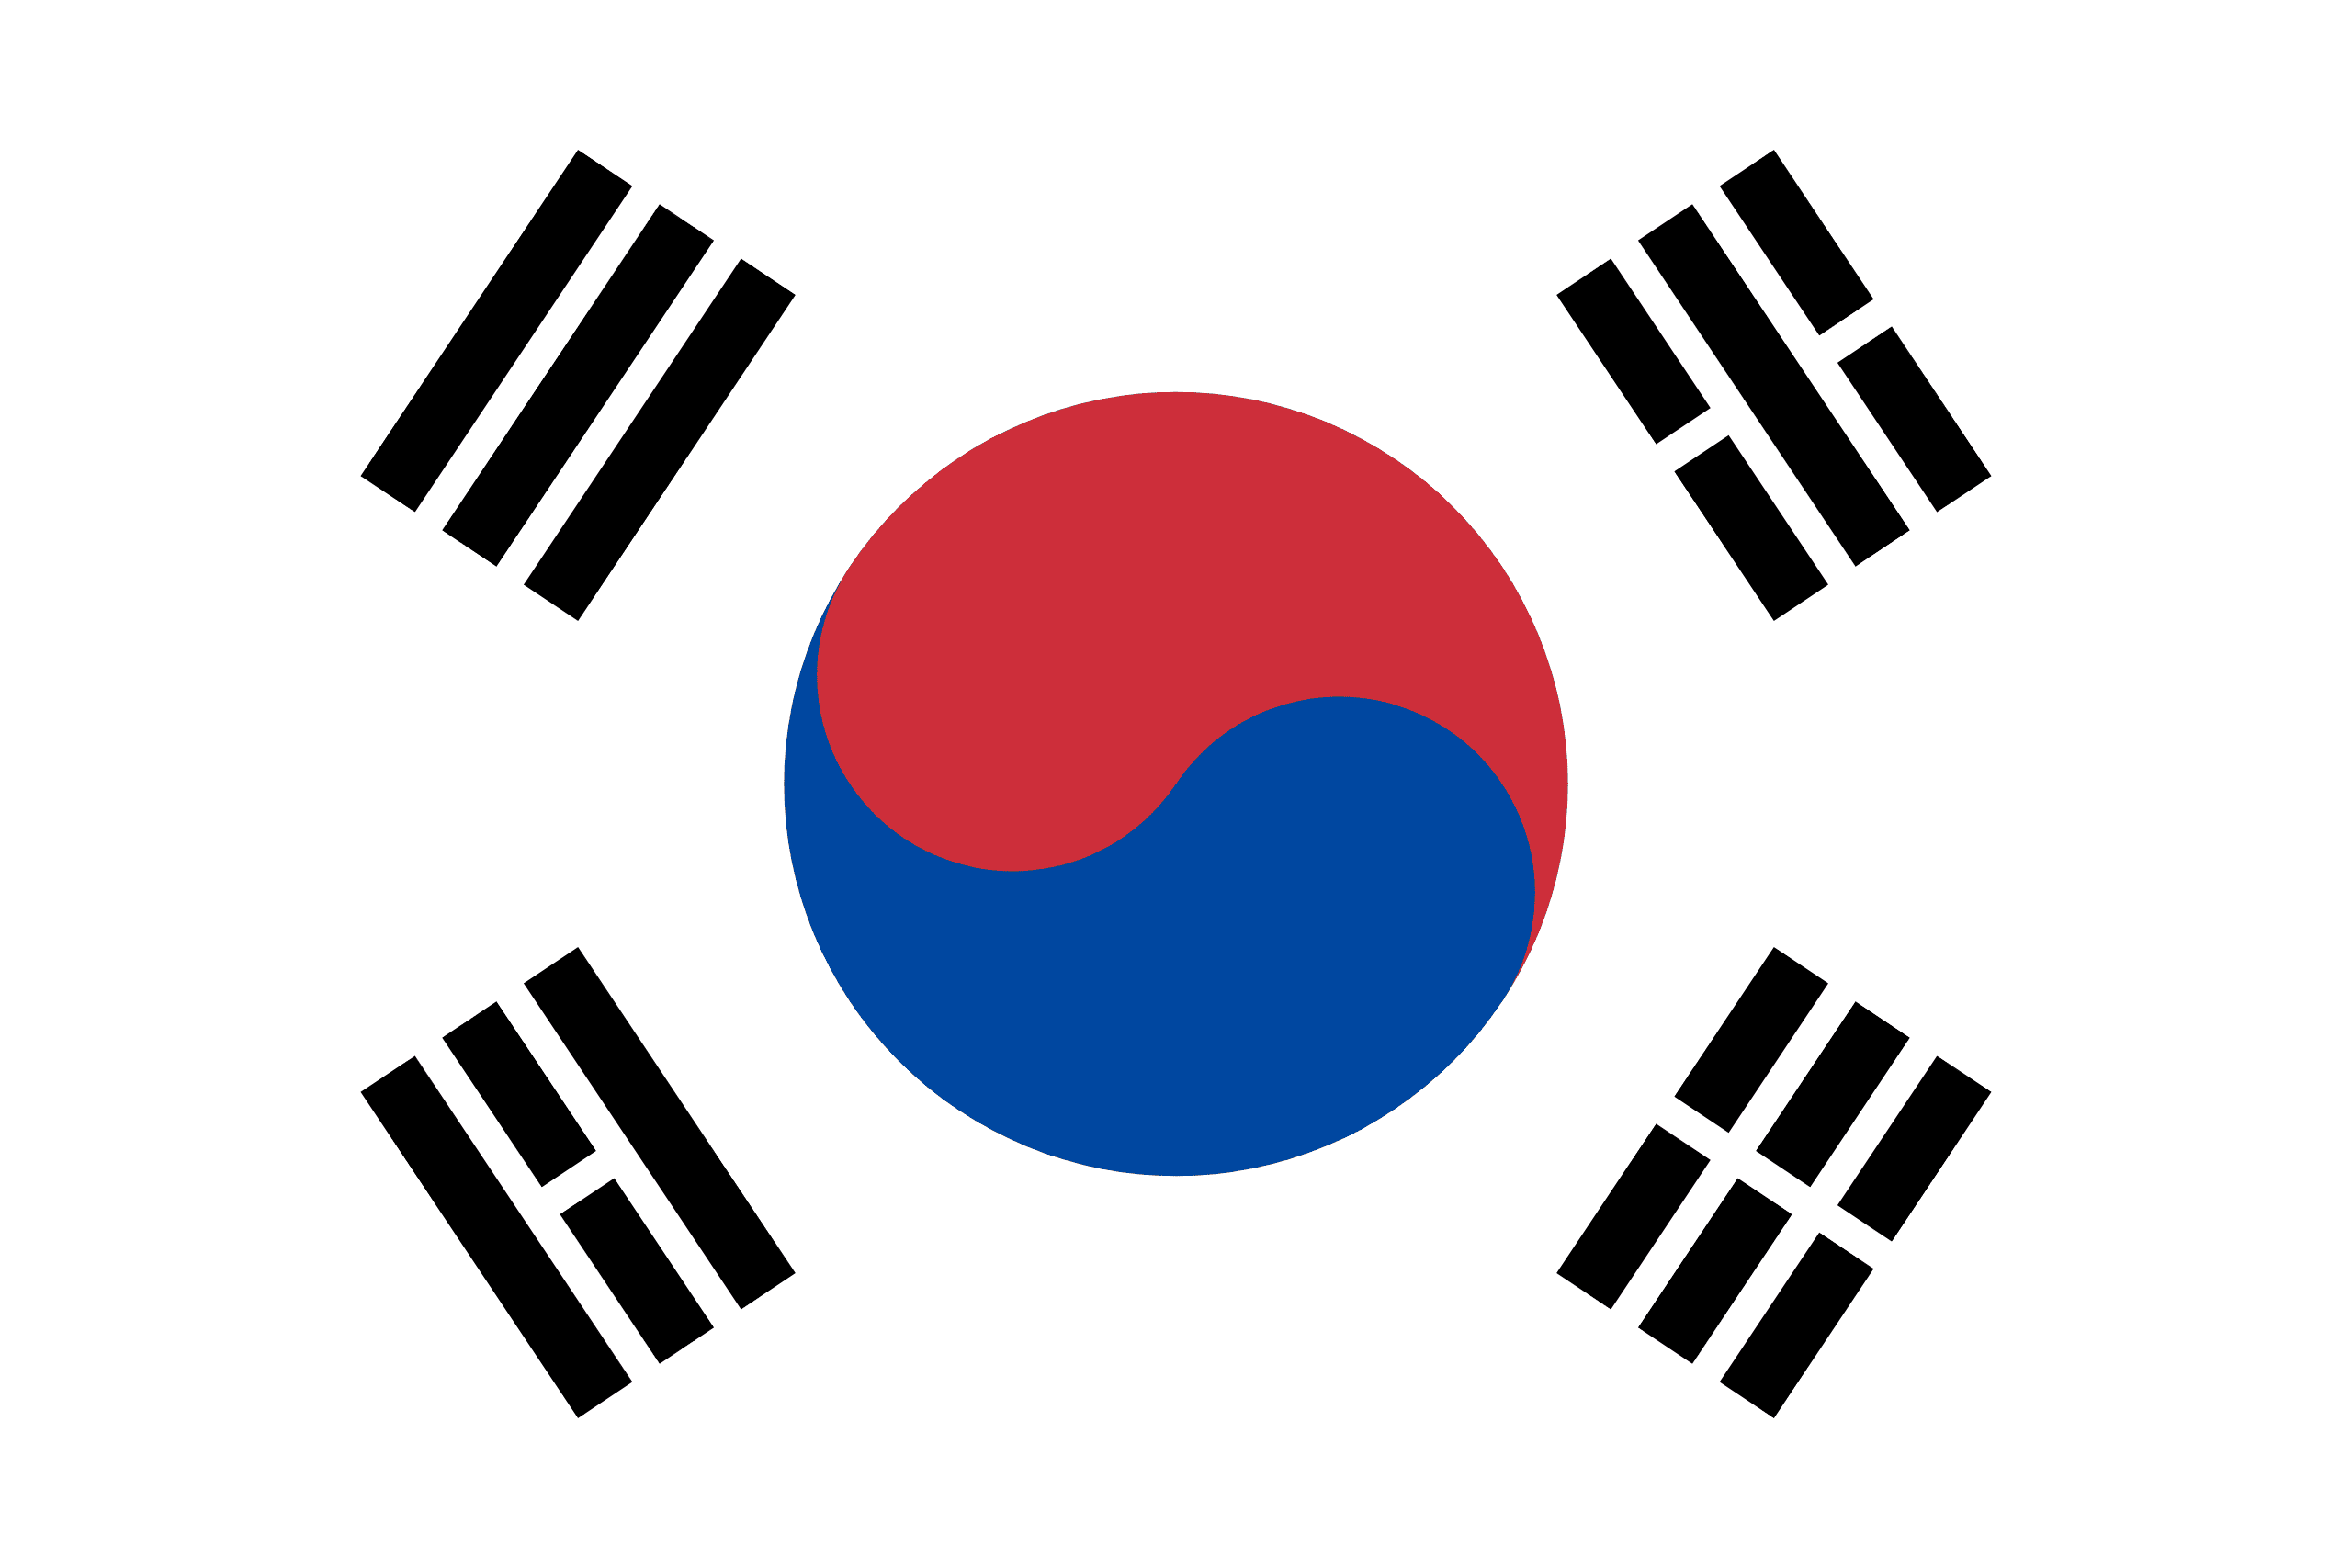 Image search results for "korea republic flag"